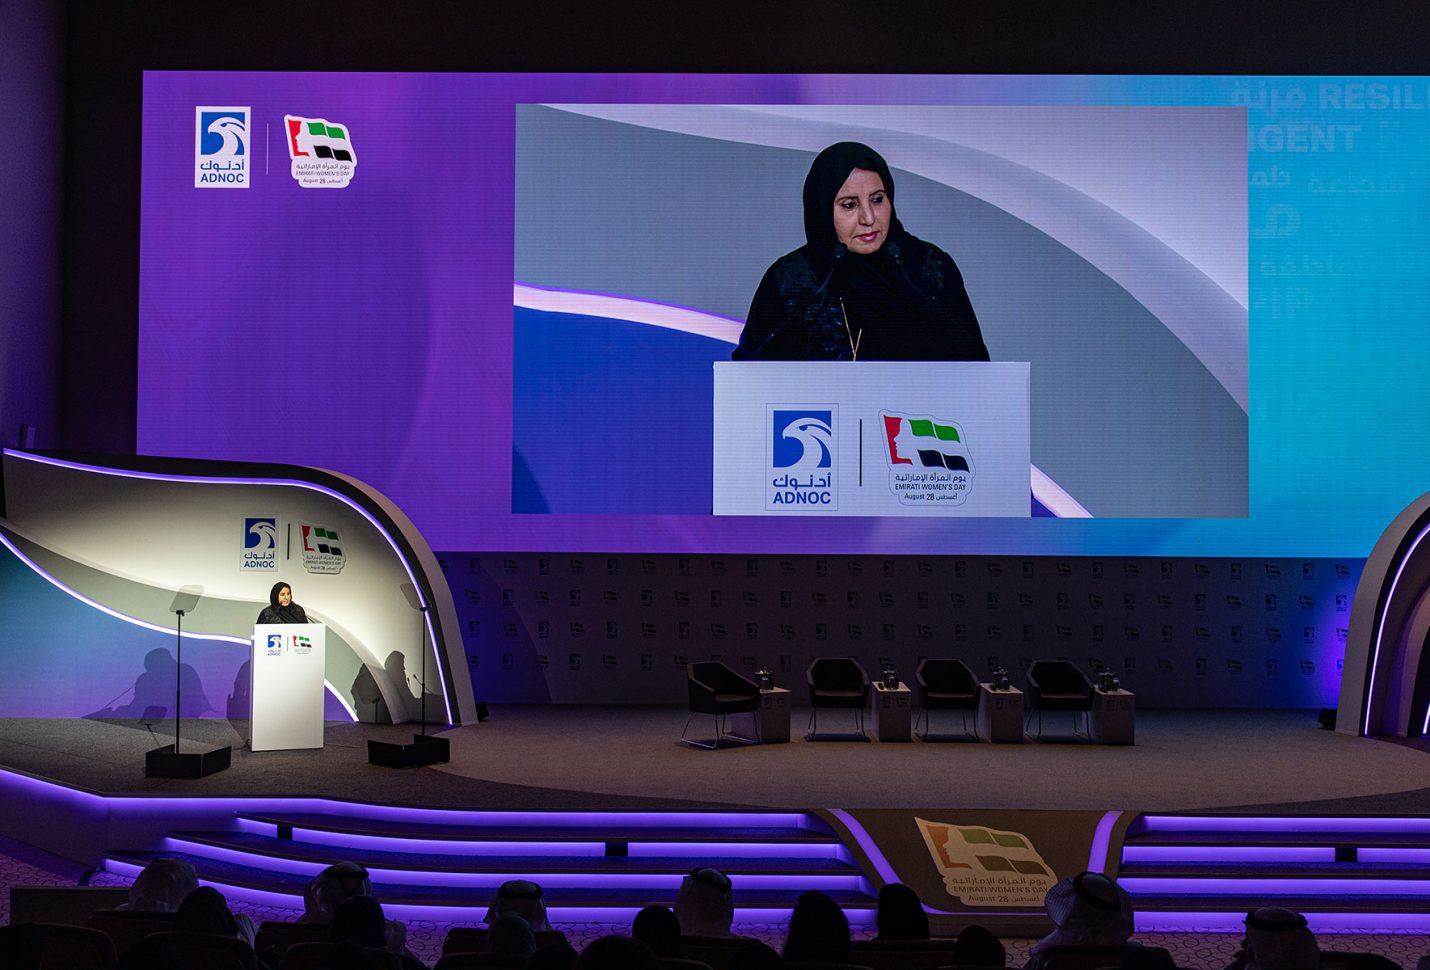 ADNOC to sign “SDG 5 Pledge to Accelerate Gender Balance in the UAE”